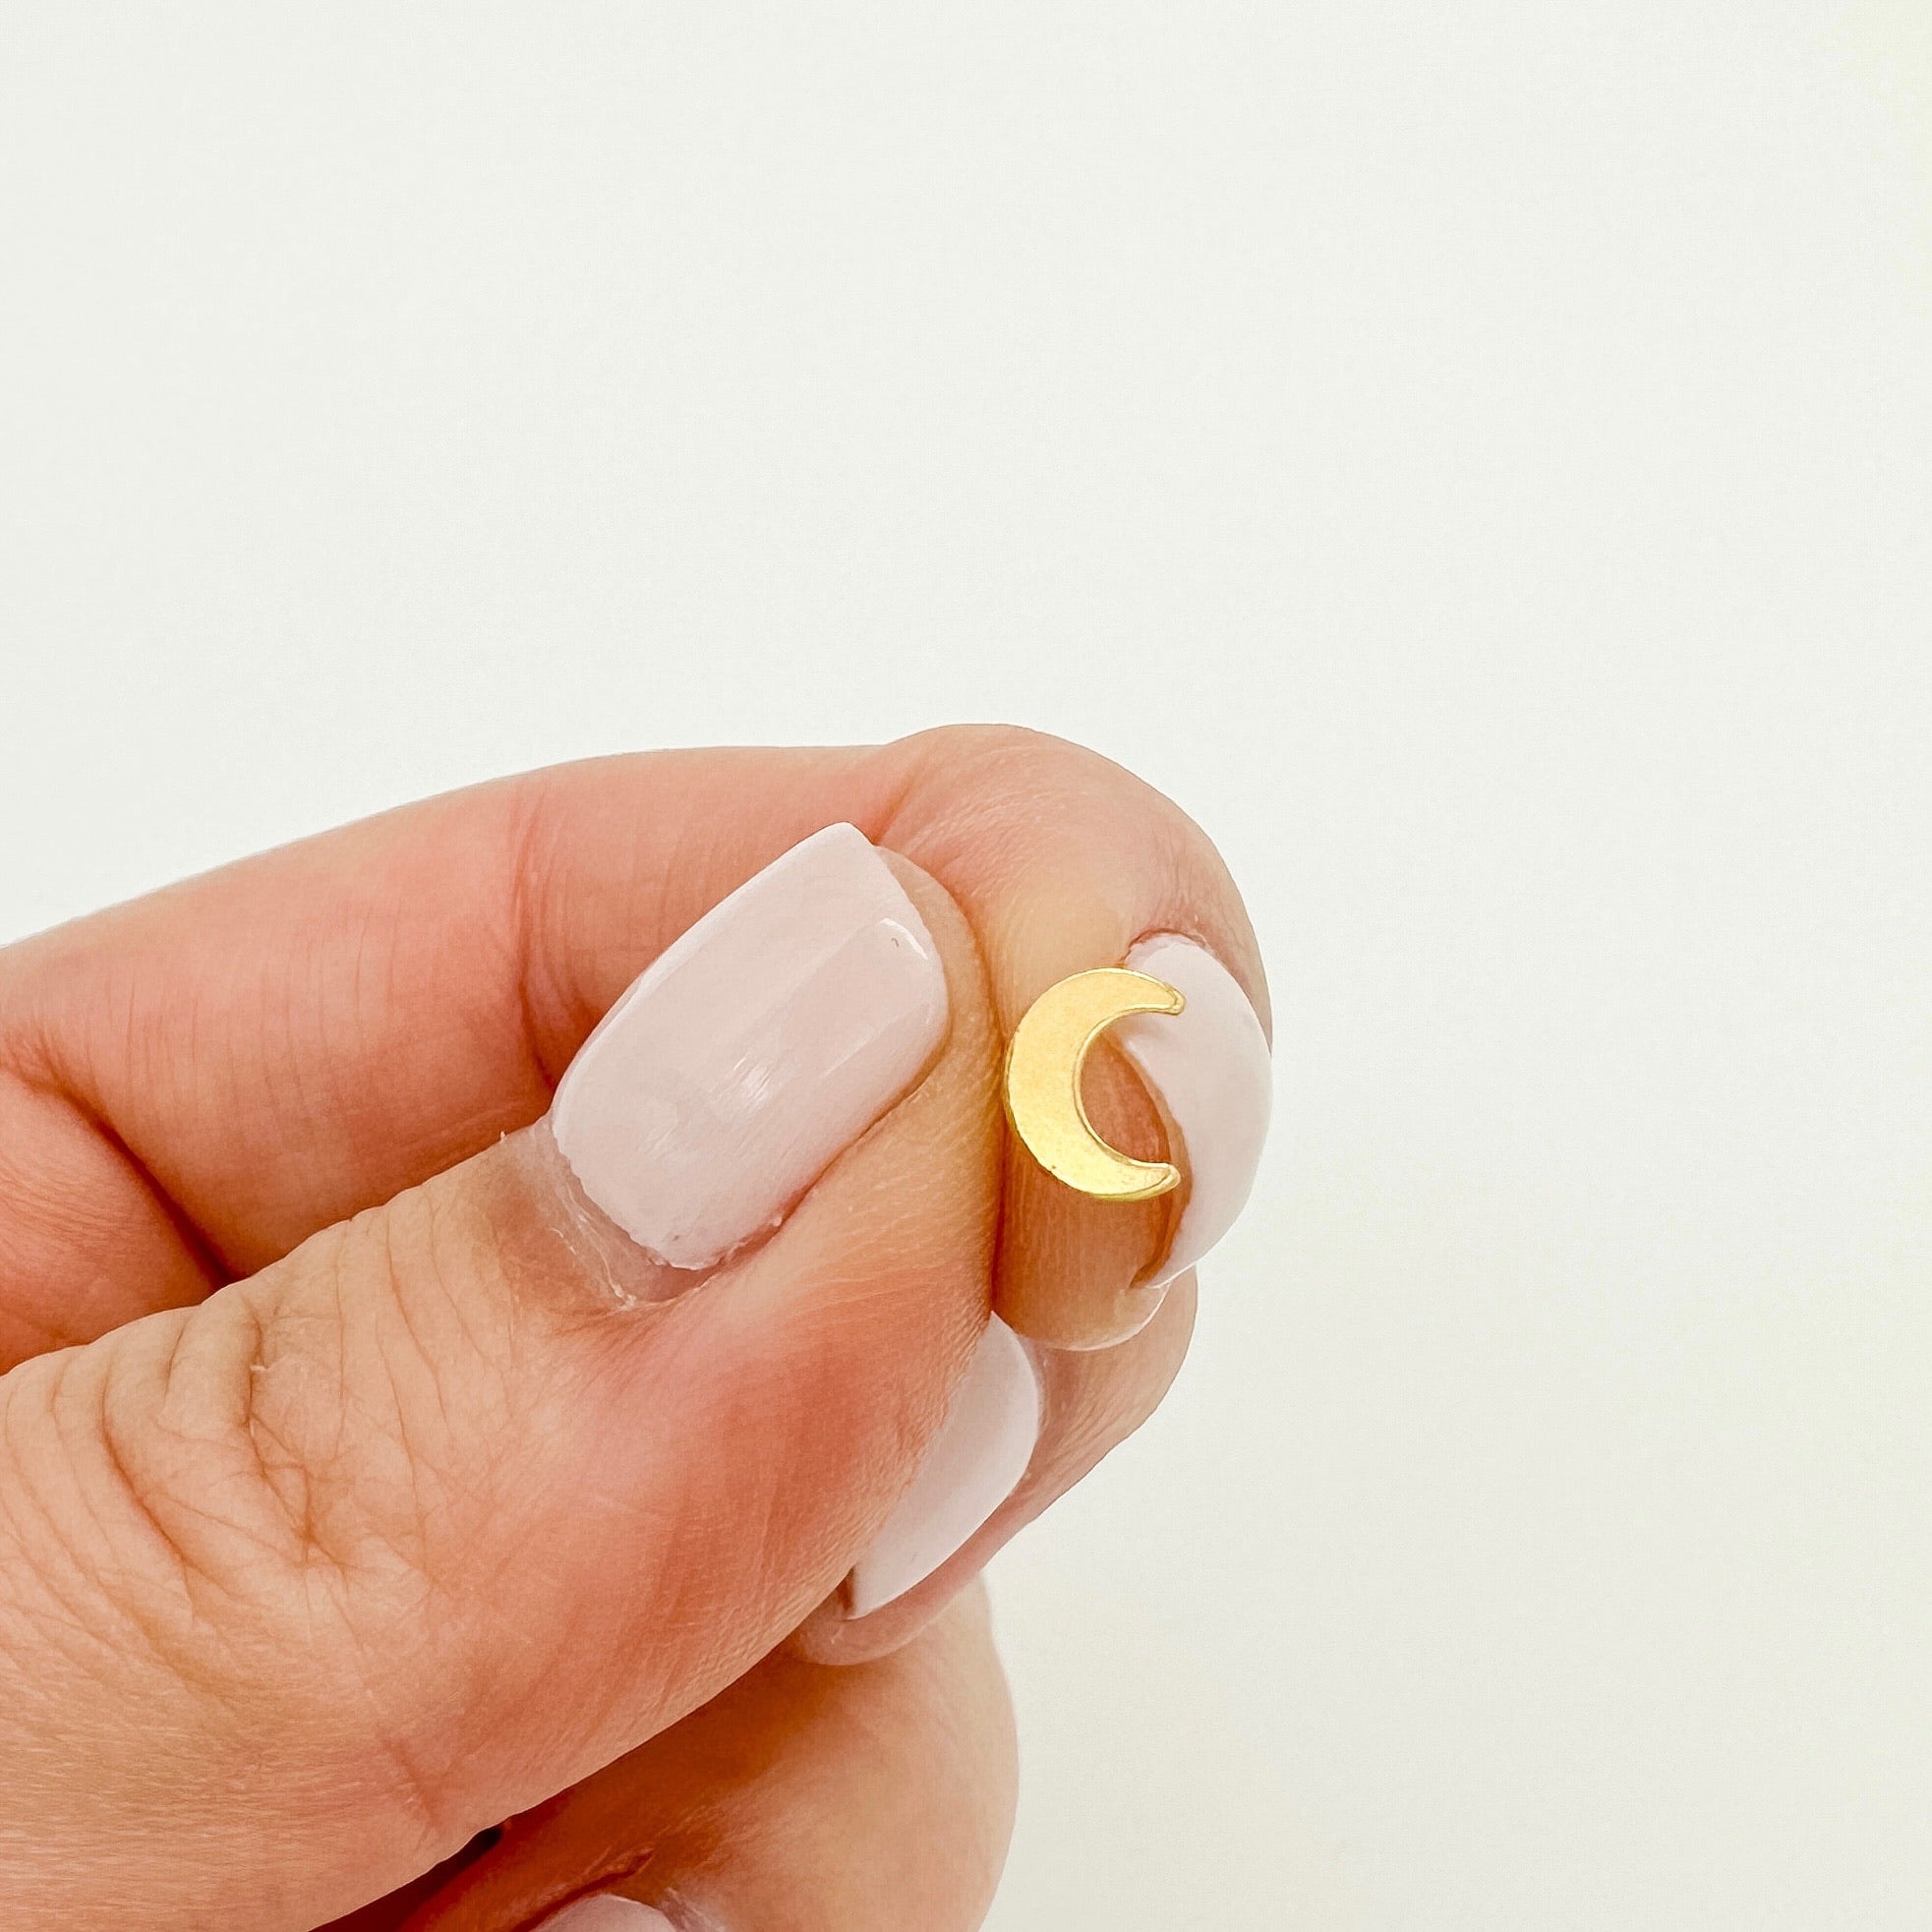 gold filled moon studs, moon earrings, crescent moon stud earrings, gold filled moon earrings, gold filled crescent moon studs